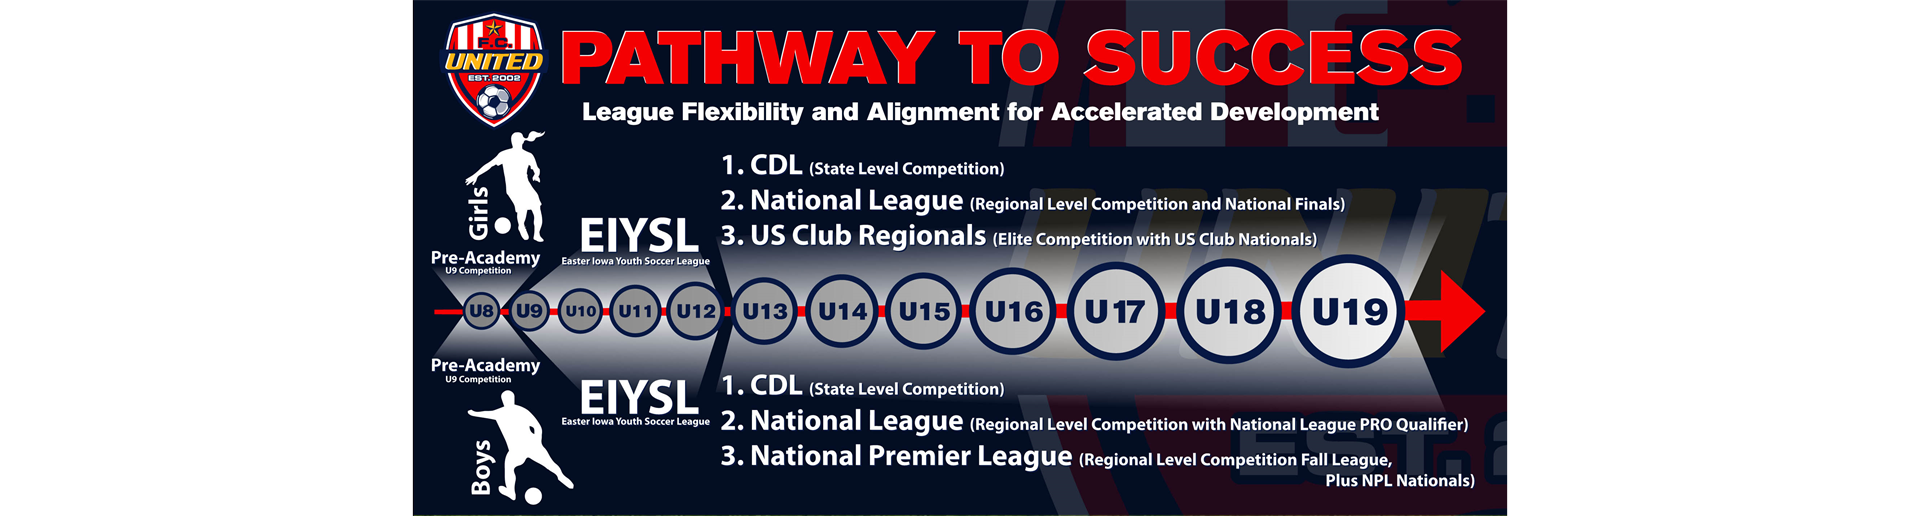 FC United Pathway to Success